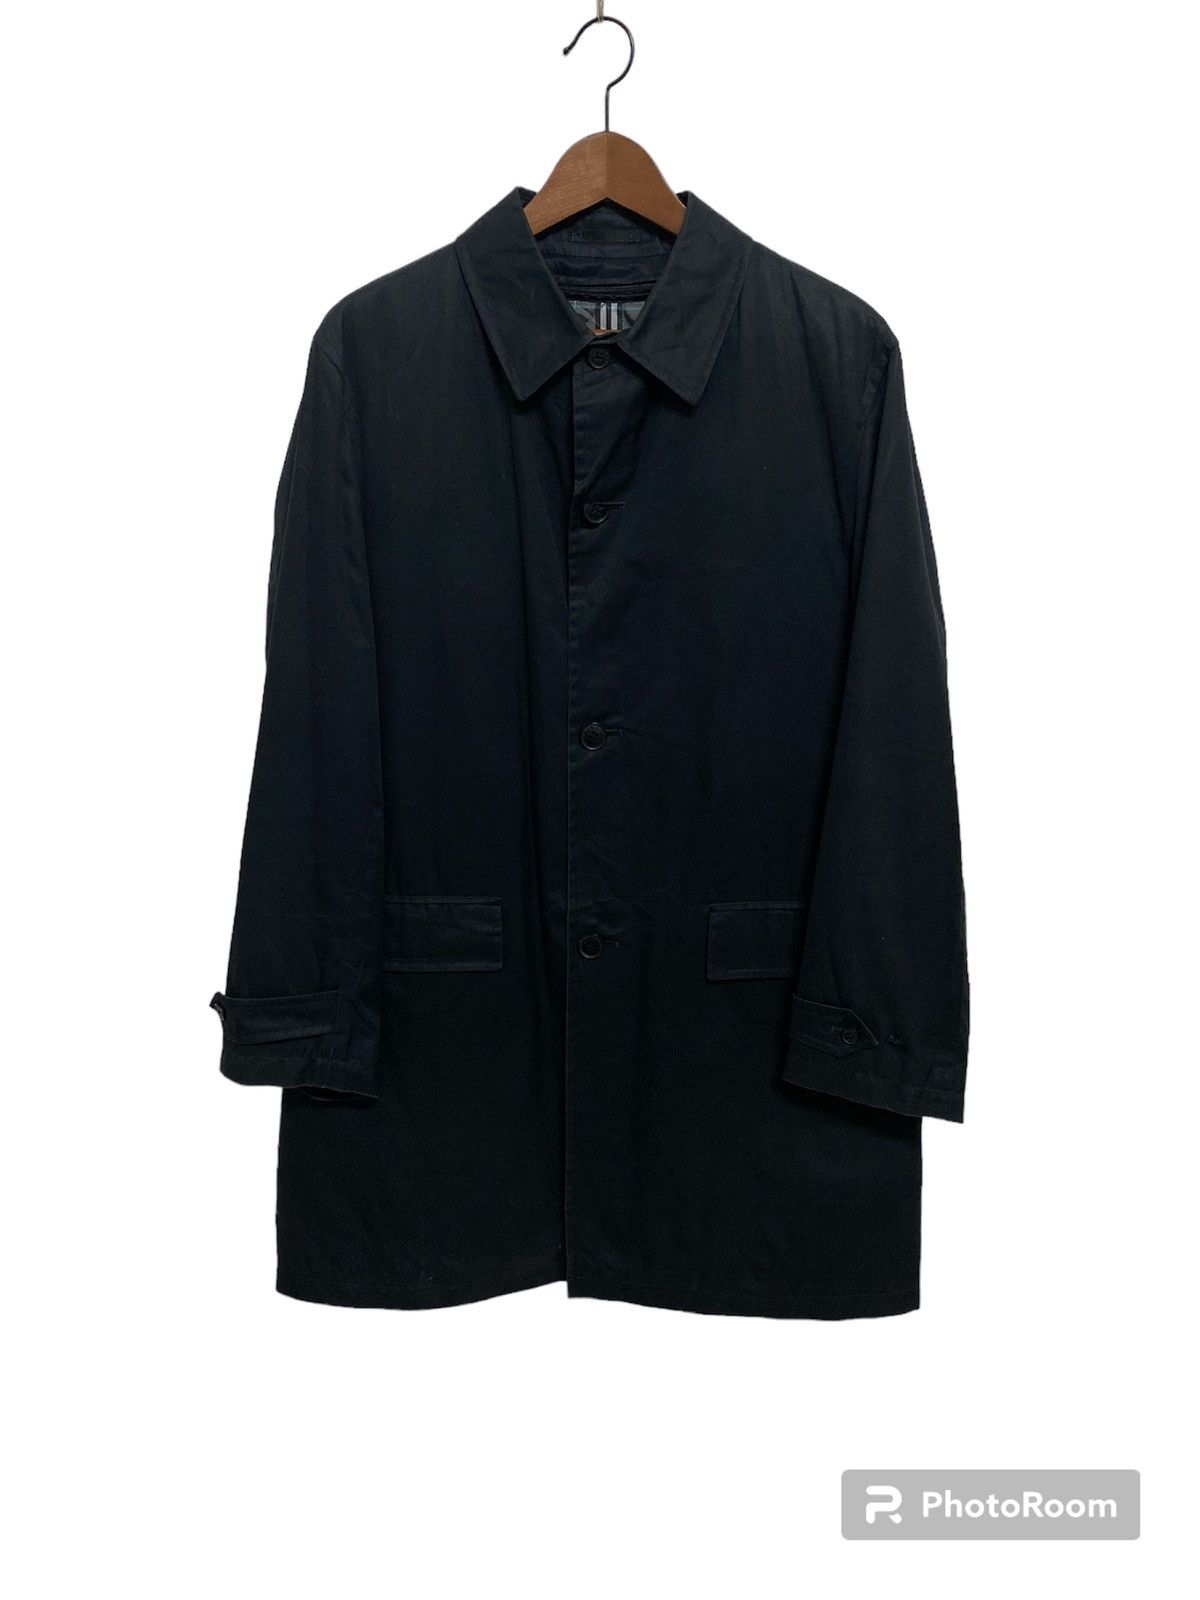 Burberry Black Label Single Breasted Trench Coat Jacket - 2